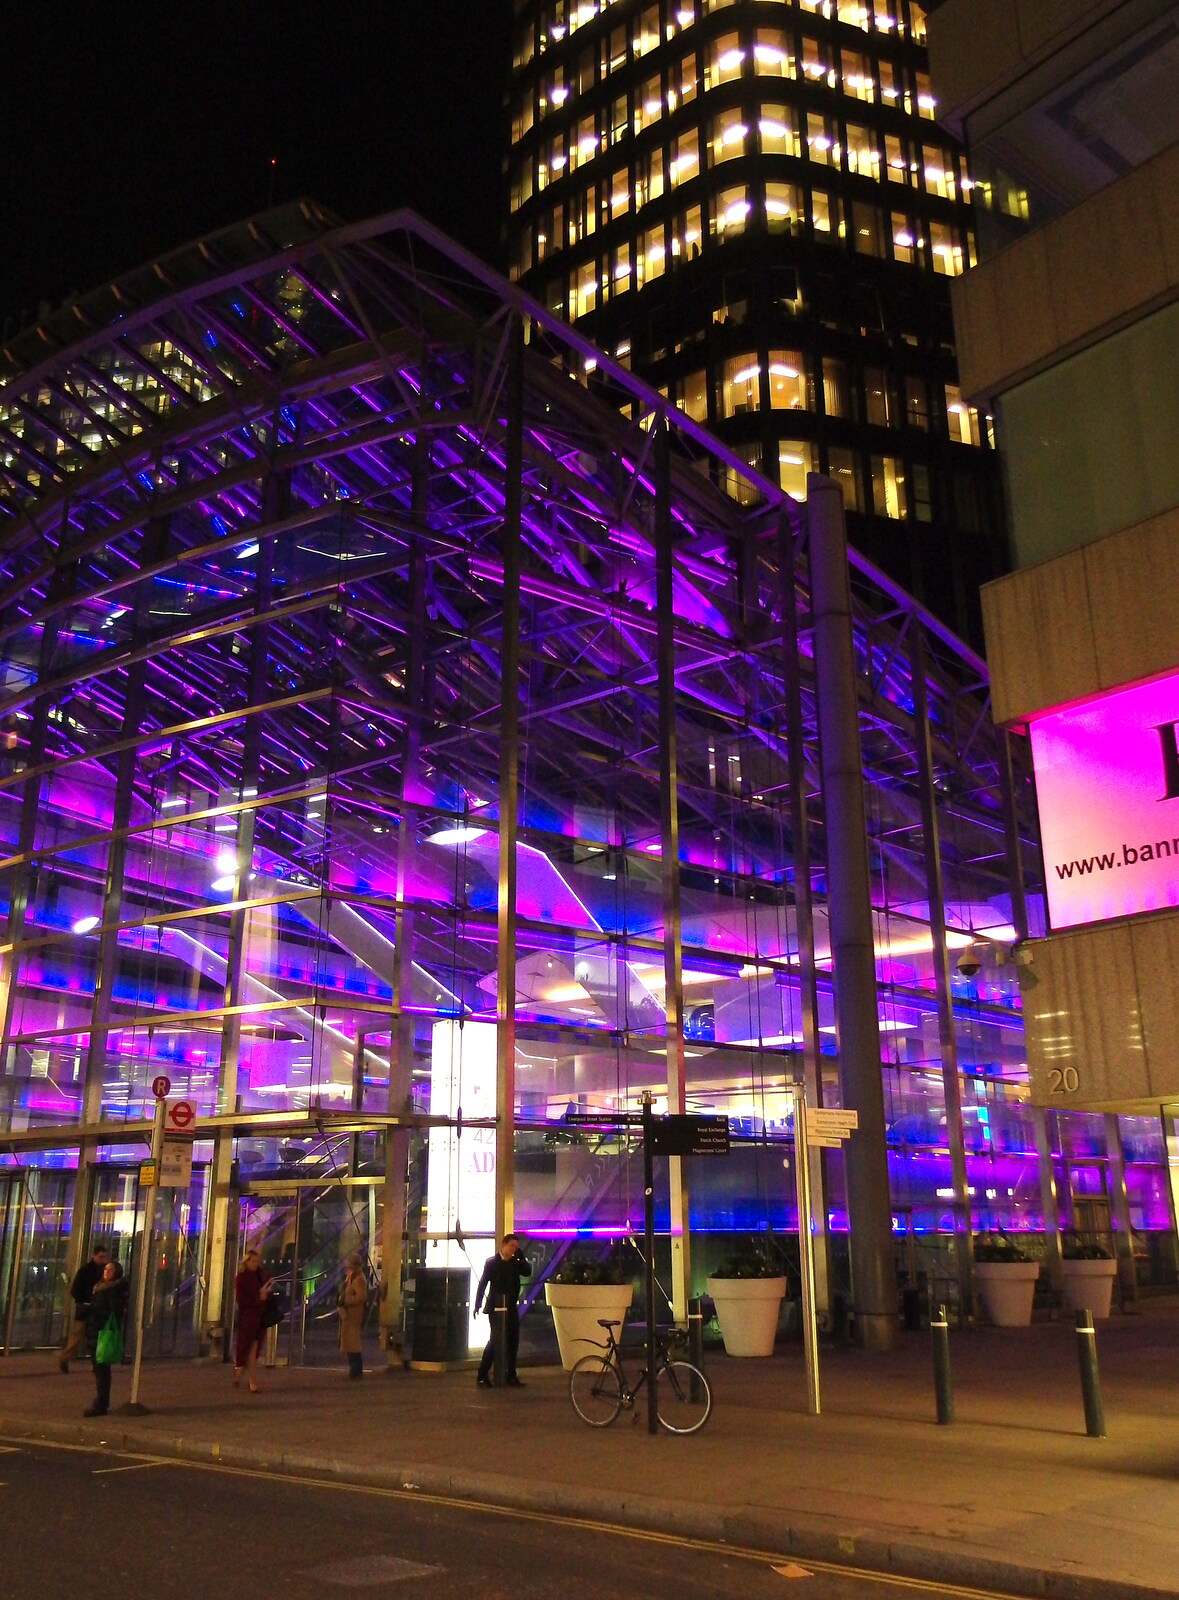 SwiftKey's Arcade Cabinet, and the Streets of Southwark, London - 5th December 2013: The purple bottom of Tower 42